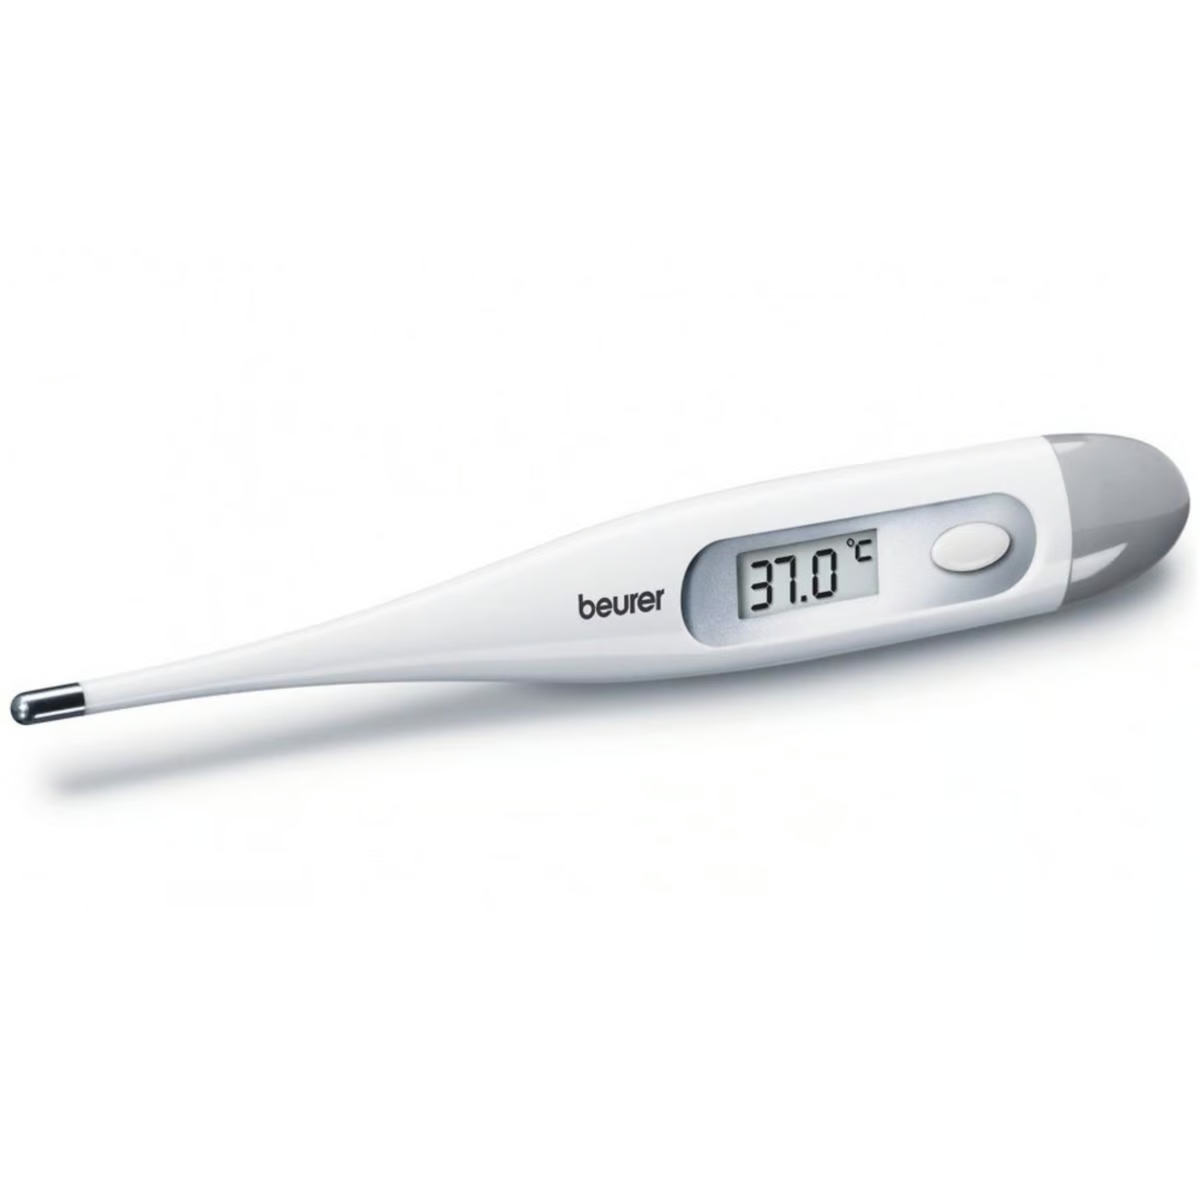 Beurer Upper Arm BP Monitor BM27 Limited Edition + Beurer Thermometer FT09